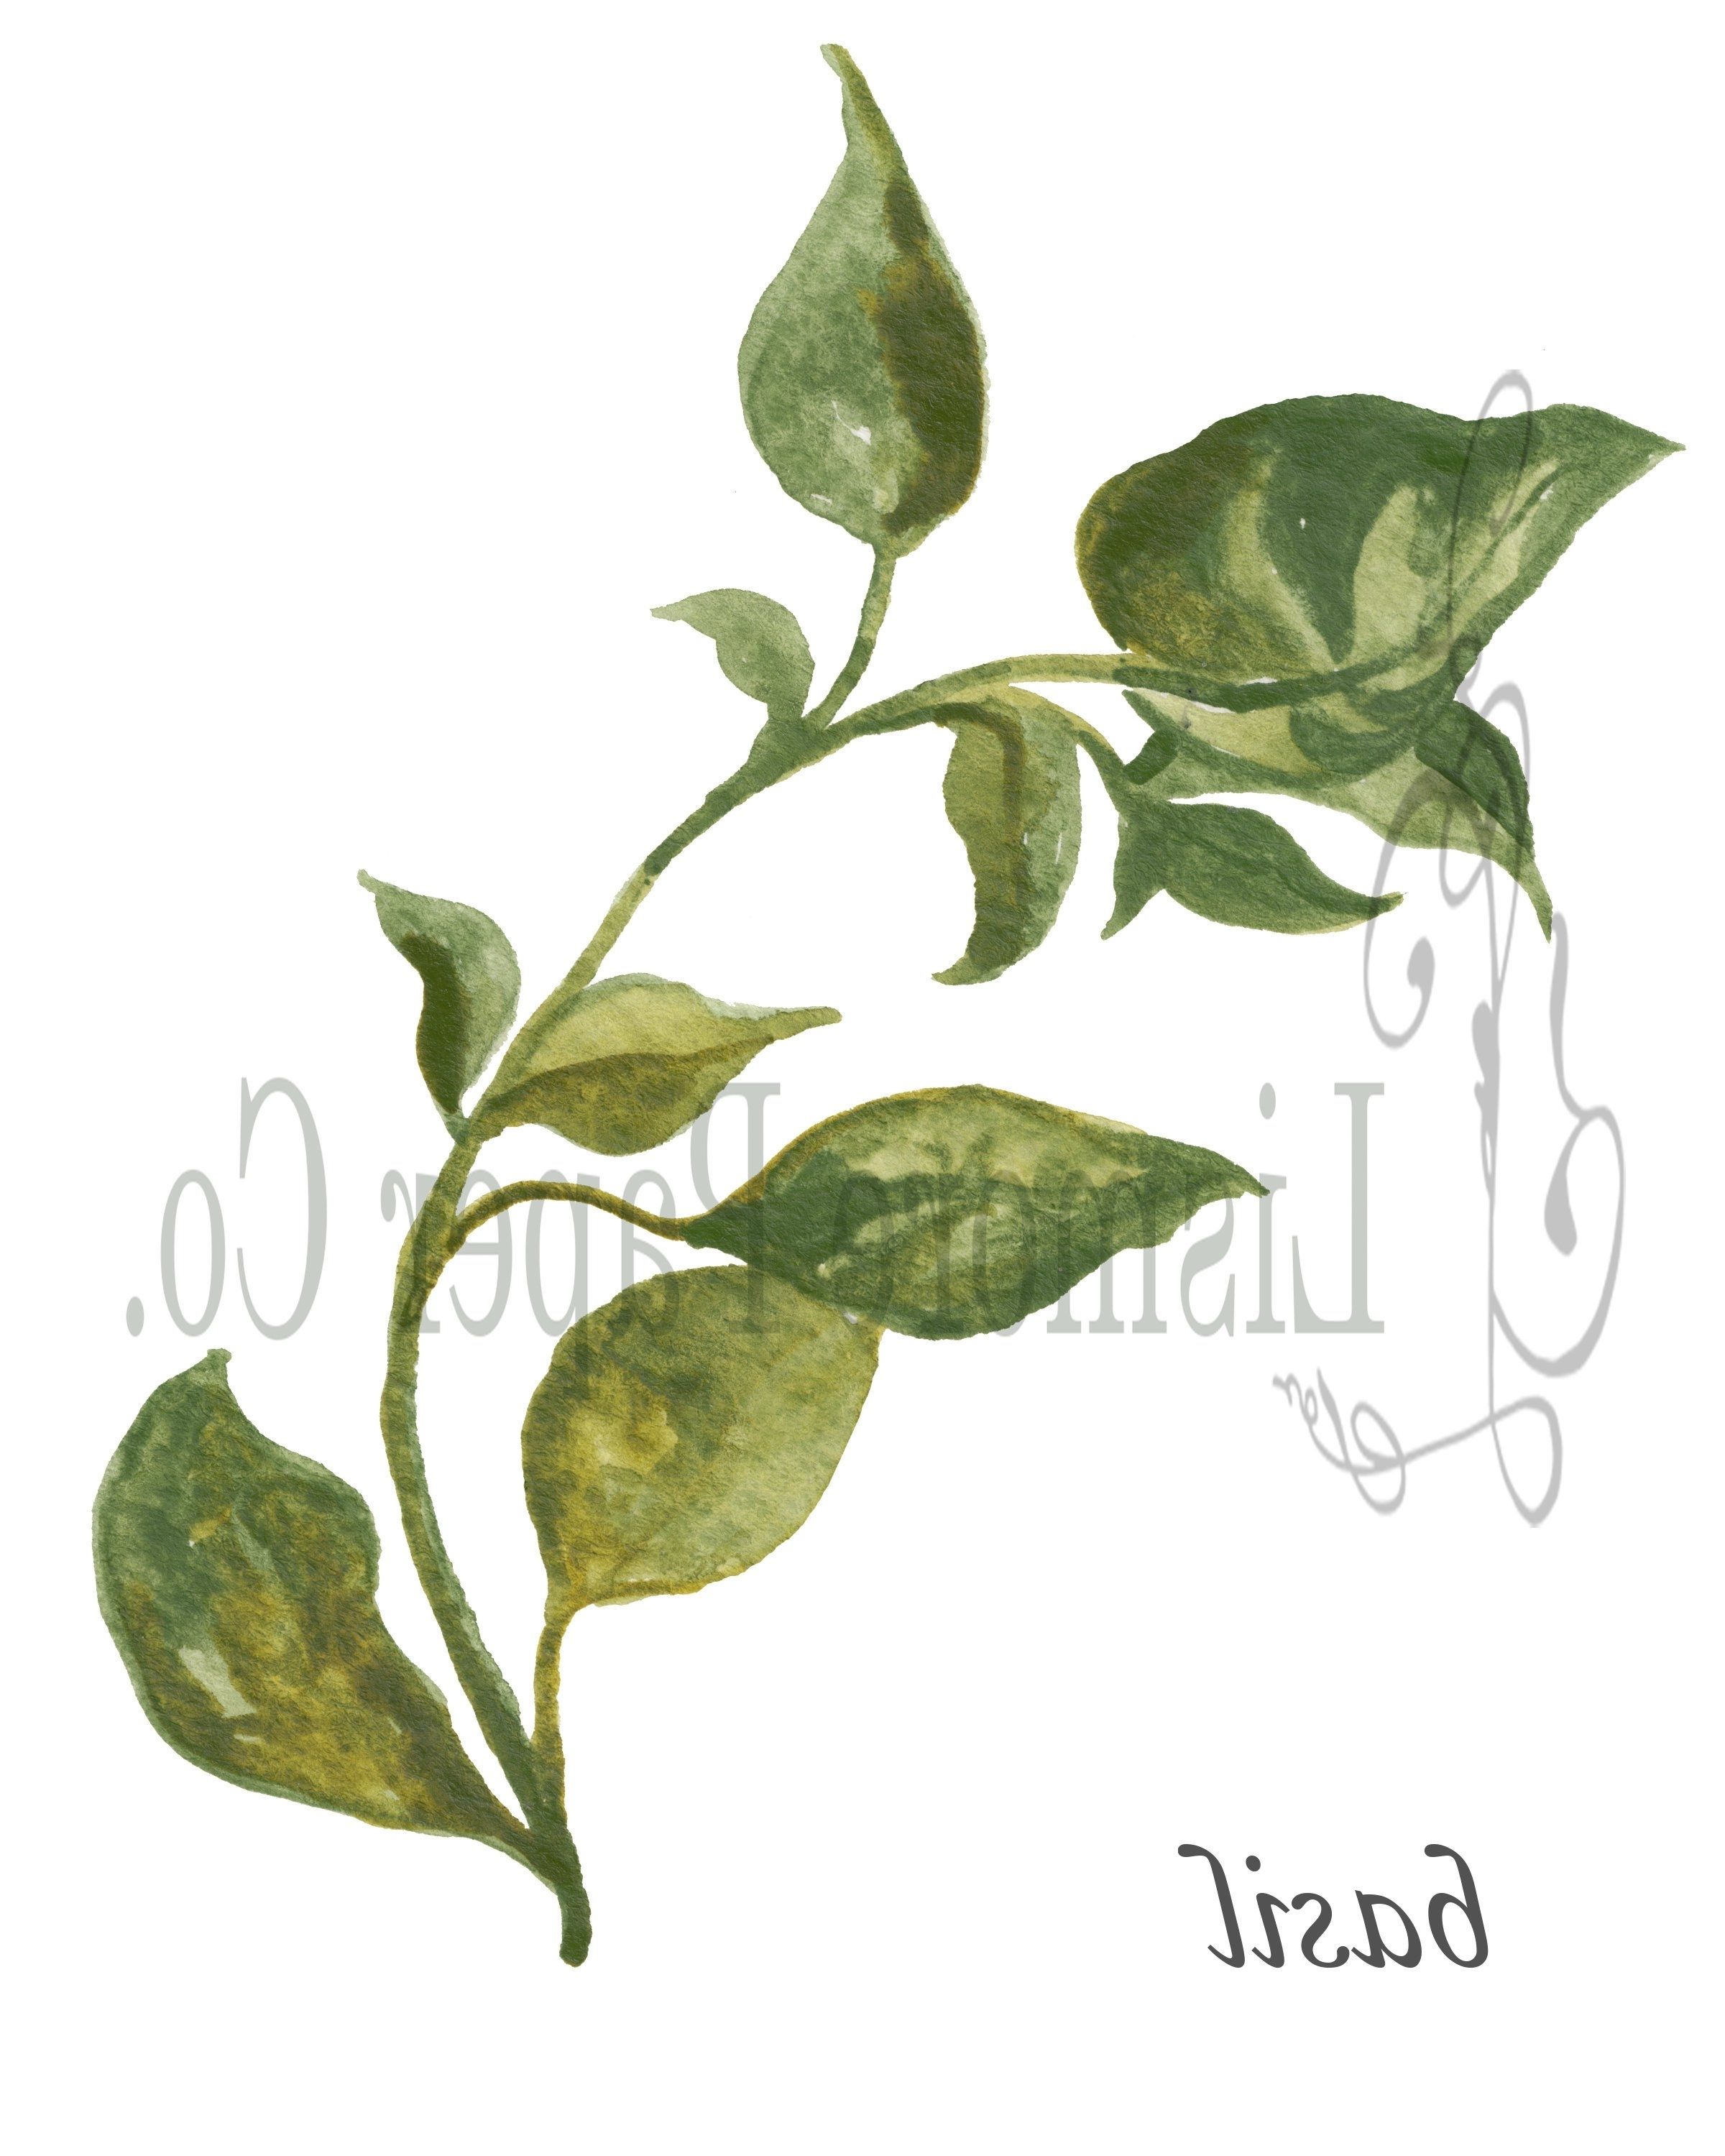 Herb Wall Art Intended For 2017 Instant Download Botanical, Basil Herb, Printable Art, Instant Wall (View 20 of 20)